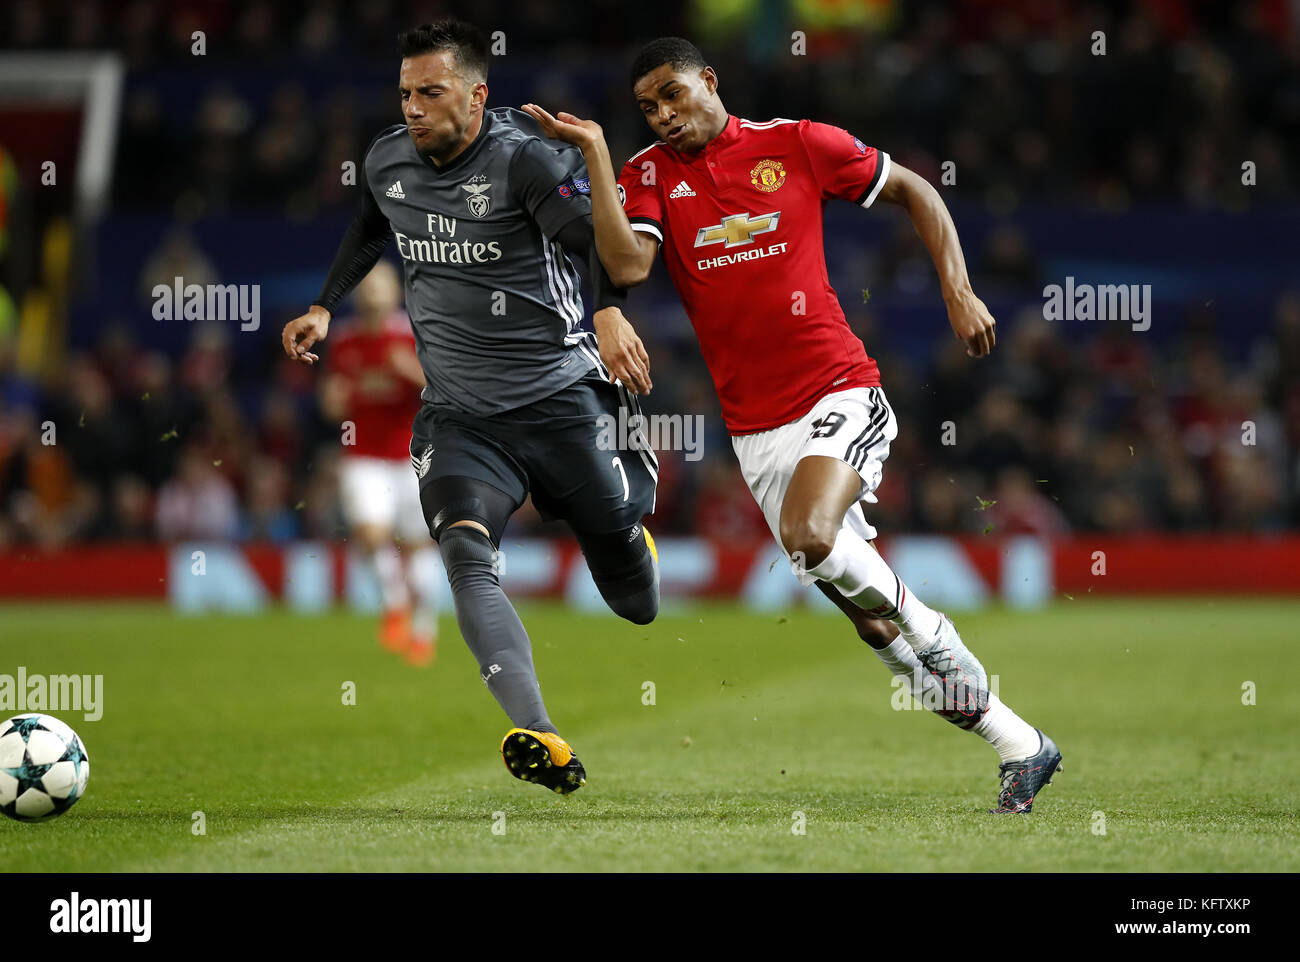 Benfica's Andreas Samaris (left) and Manchester United's Marcus Rashford (right) battle for the ball during the UEFA Champions League, Group A match at Old Trafford, Manchester. Stock Photo